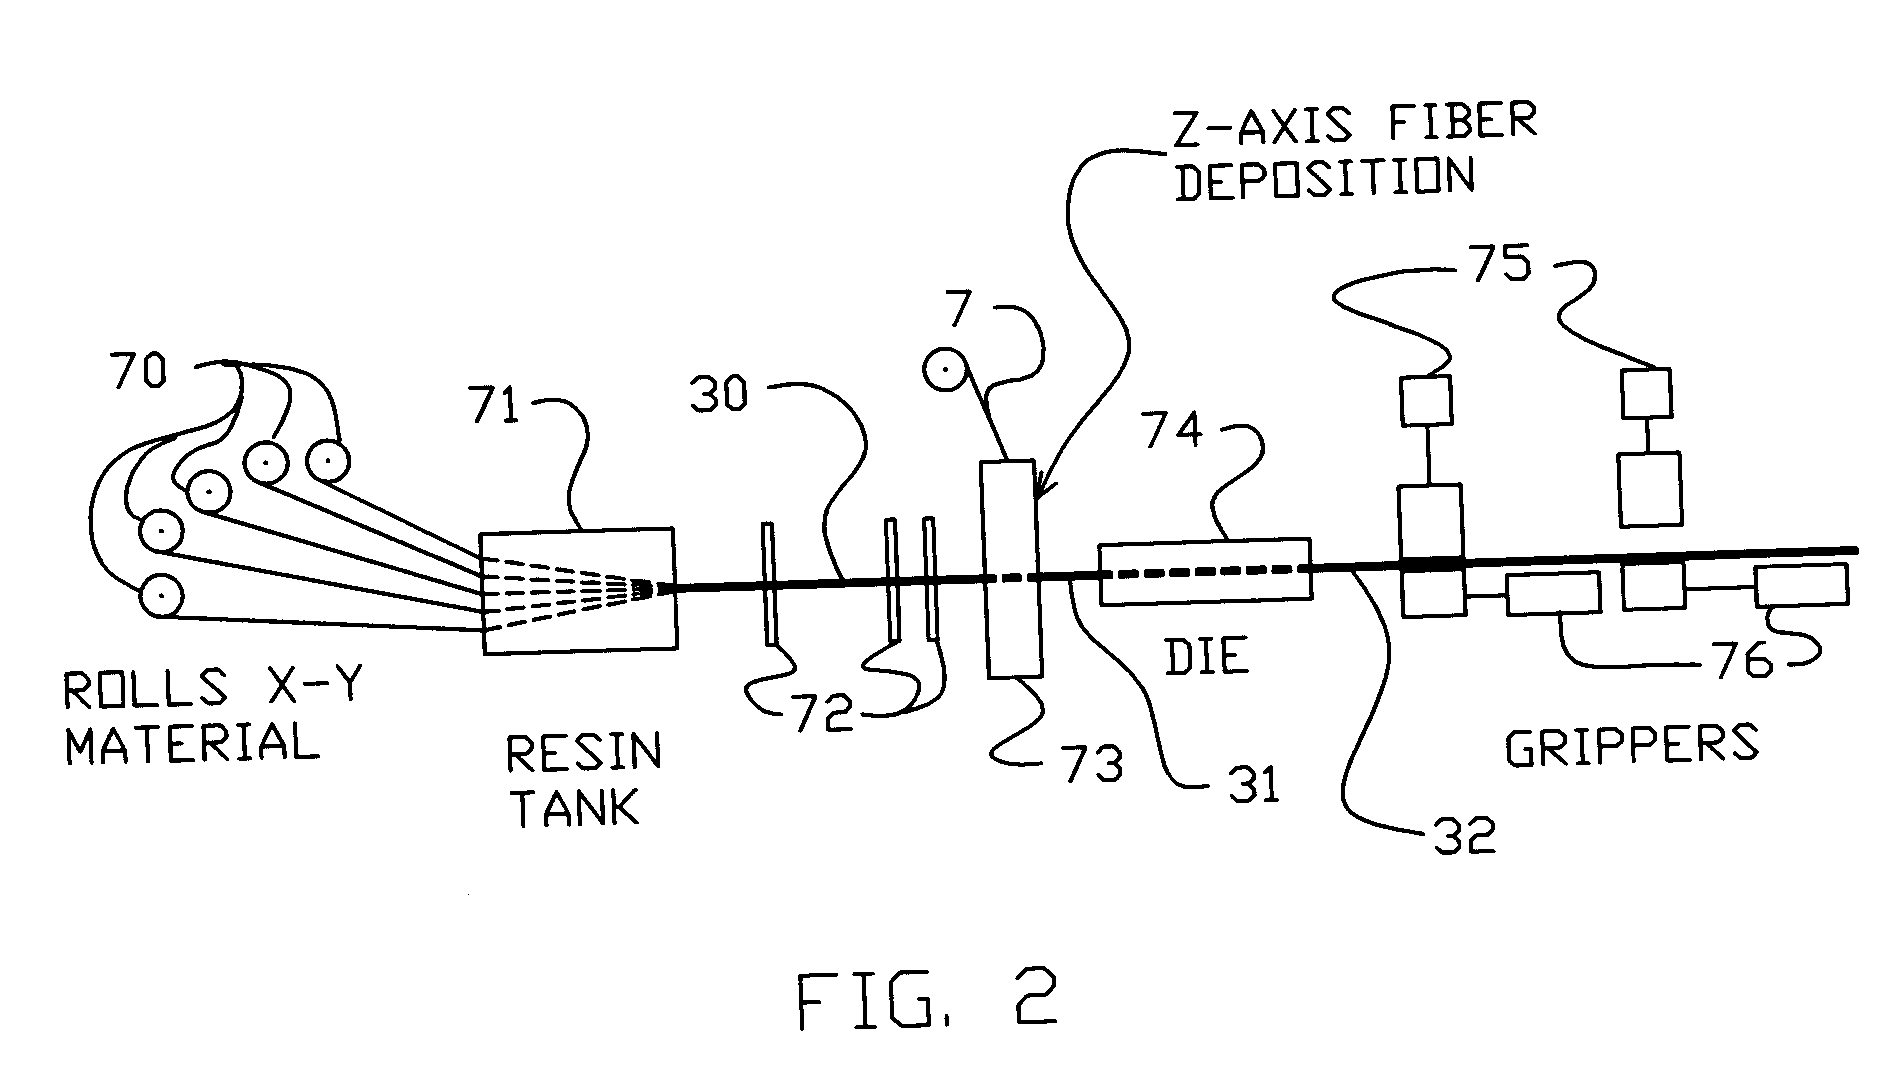 Method of inserting z-axis reinforcing fibers into a composite laminate